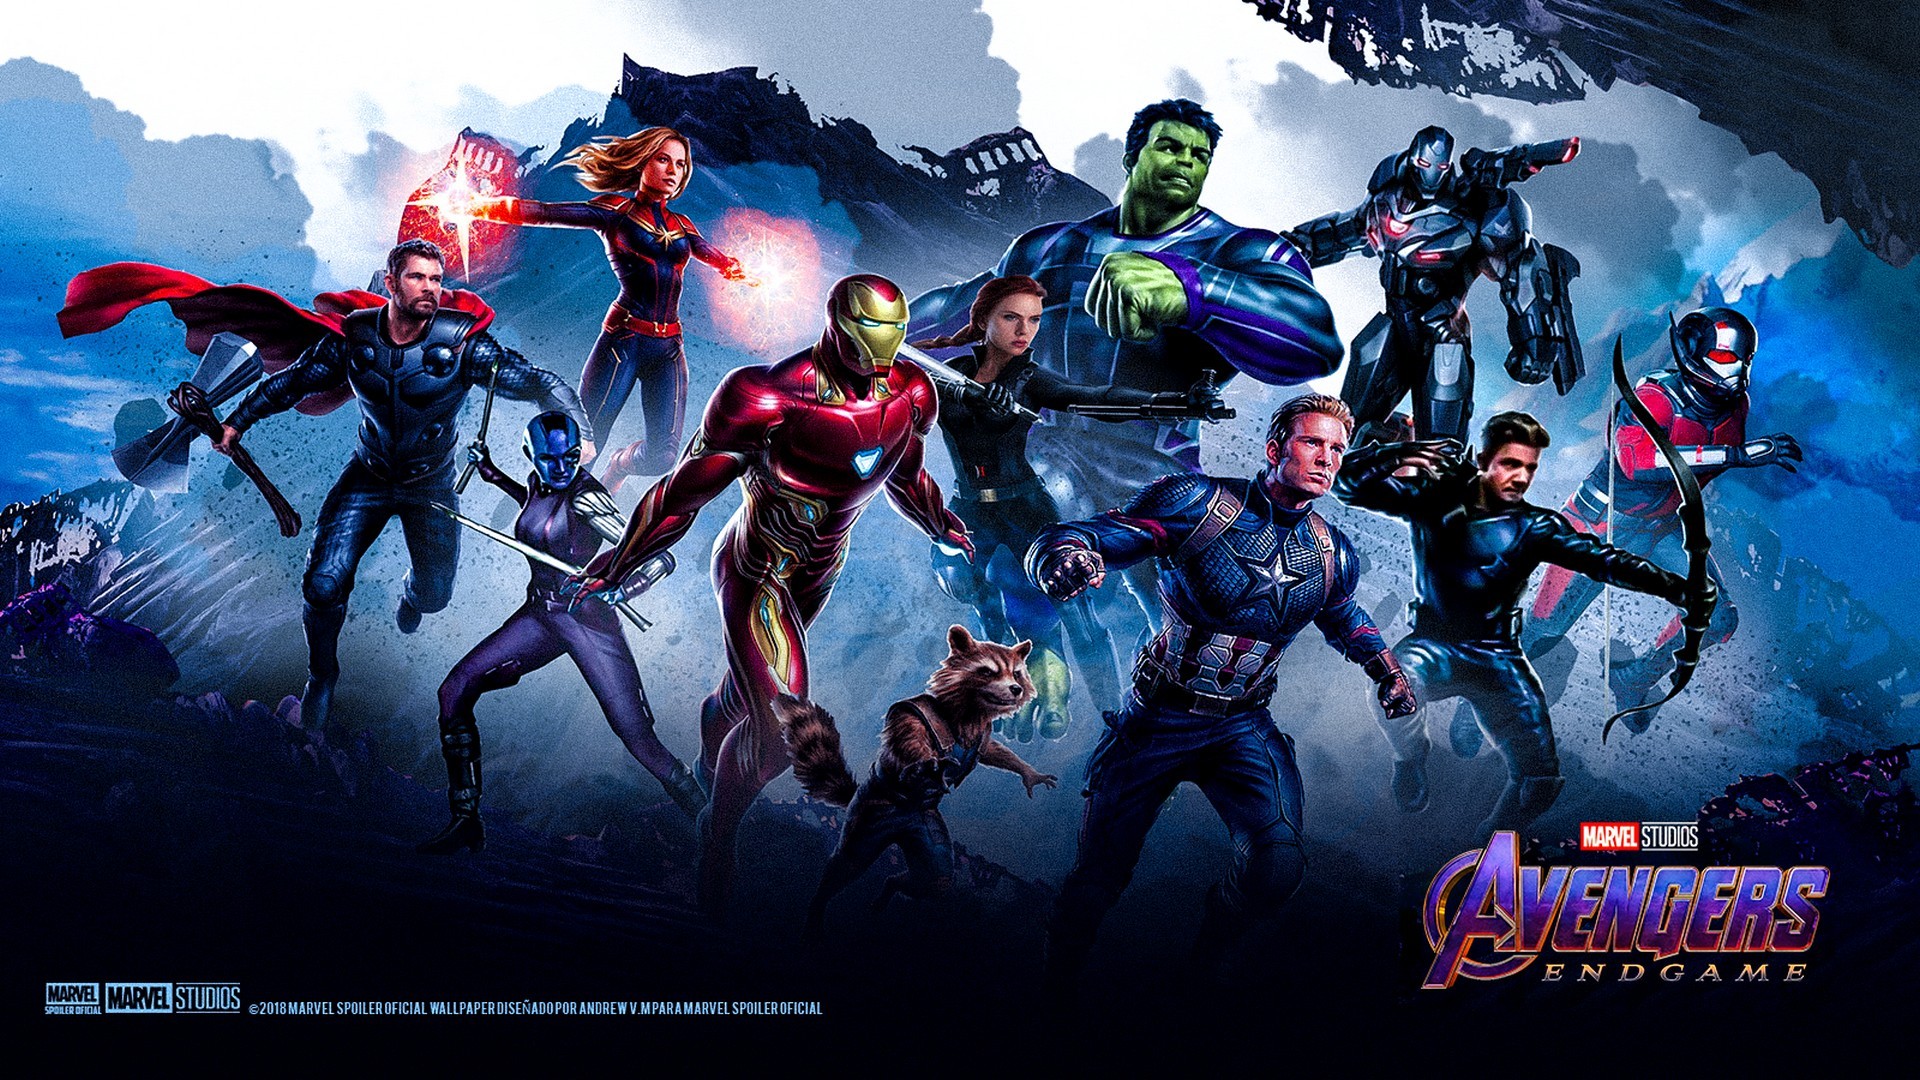 Avengers Endgame Wallpaper Hd Download For Android Mobile